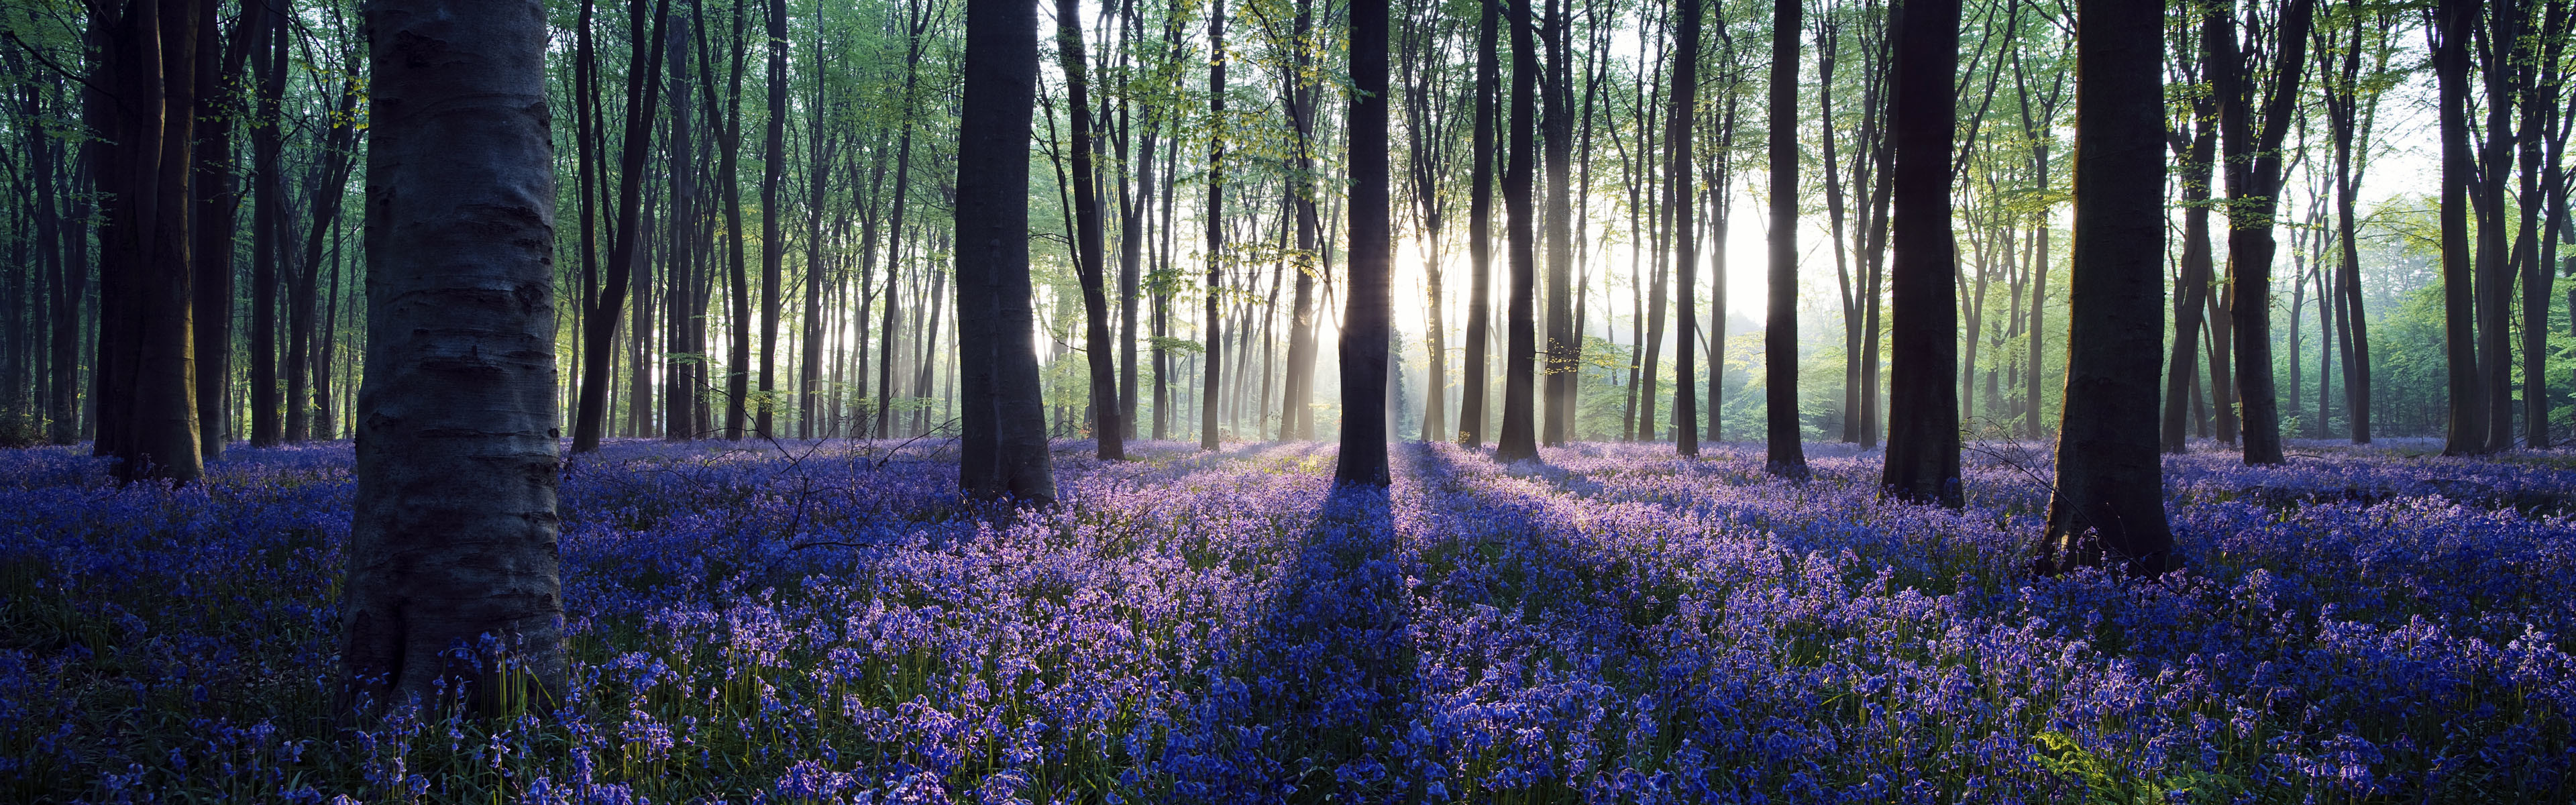 3840x1200 wallpaper.wiki-Lavender-in-Forest-Panoramic-Image-PIC-